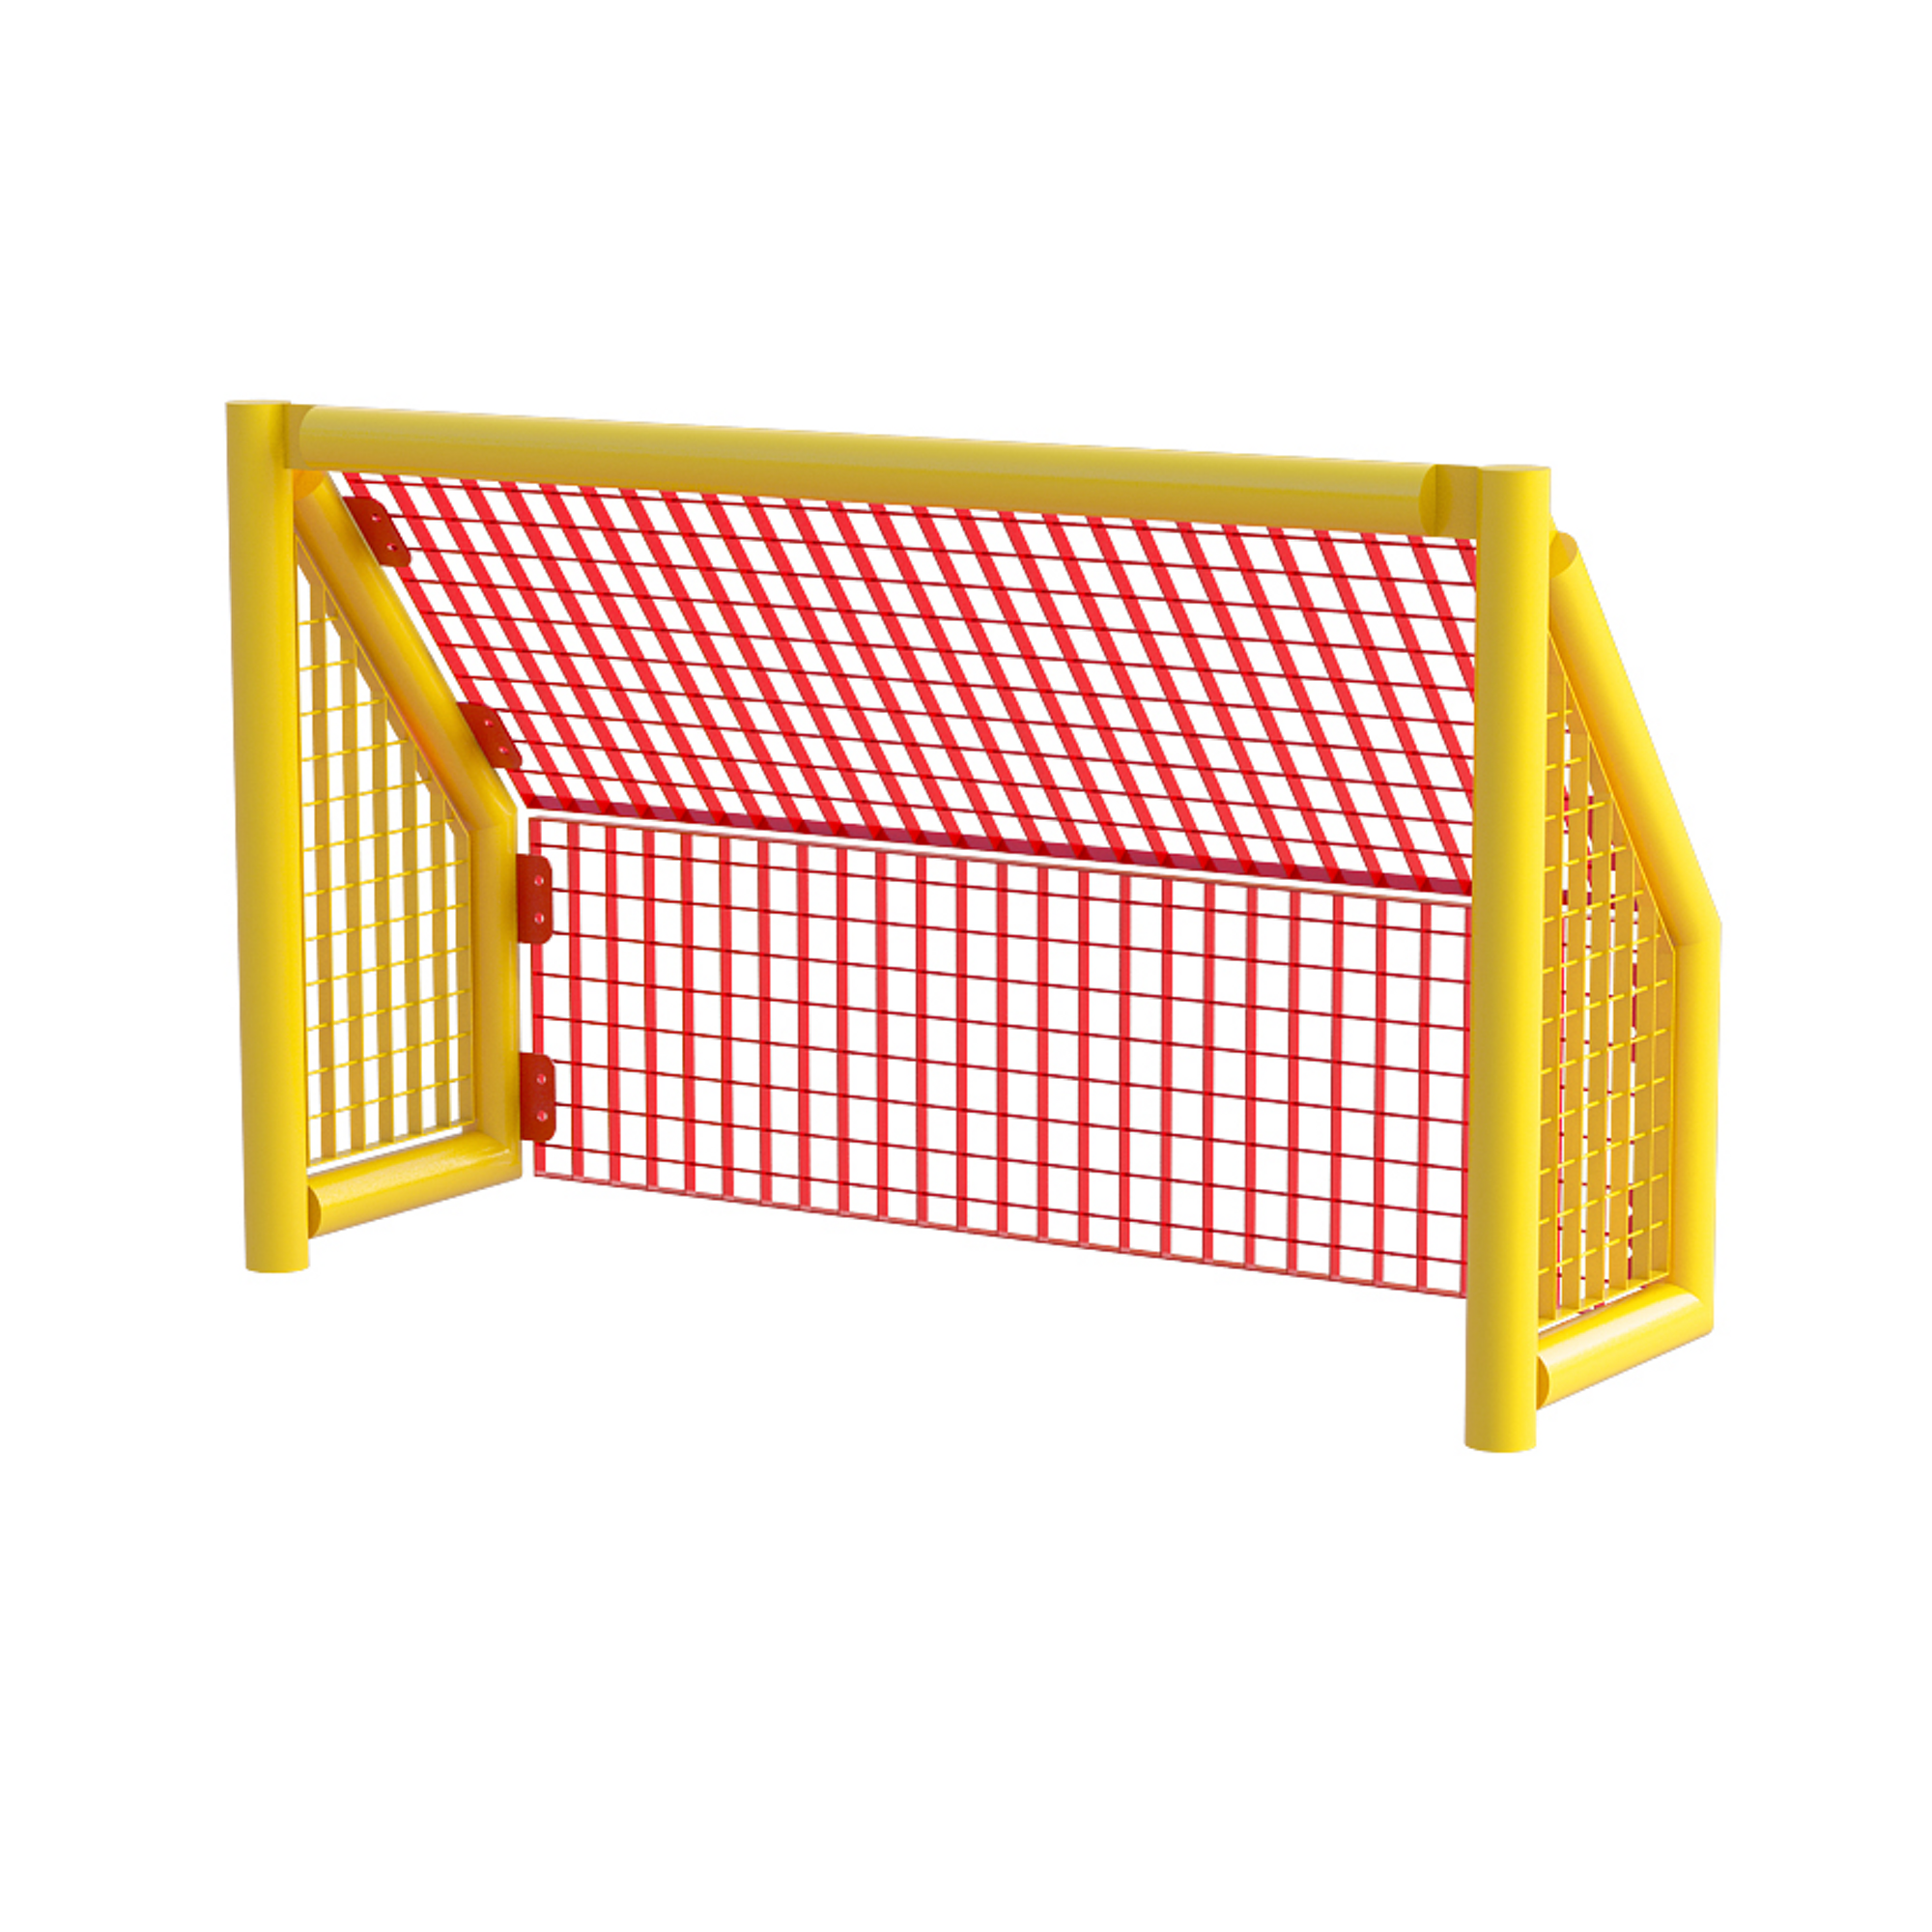 Primary Full Goal Recess Yel Frame Red